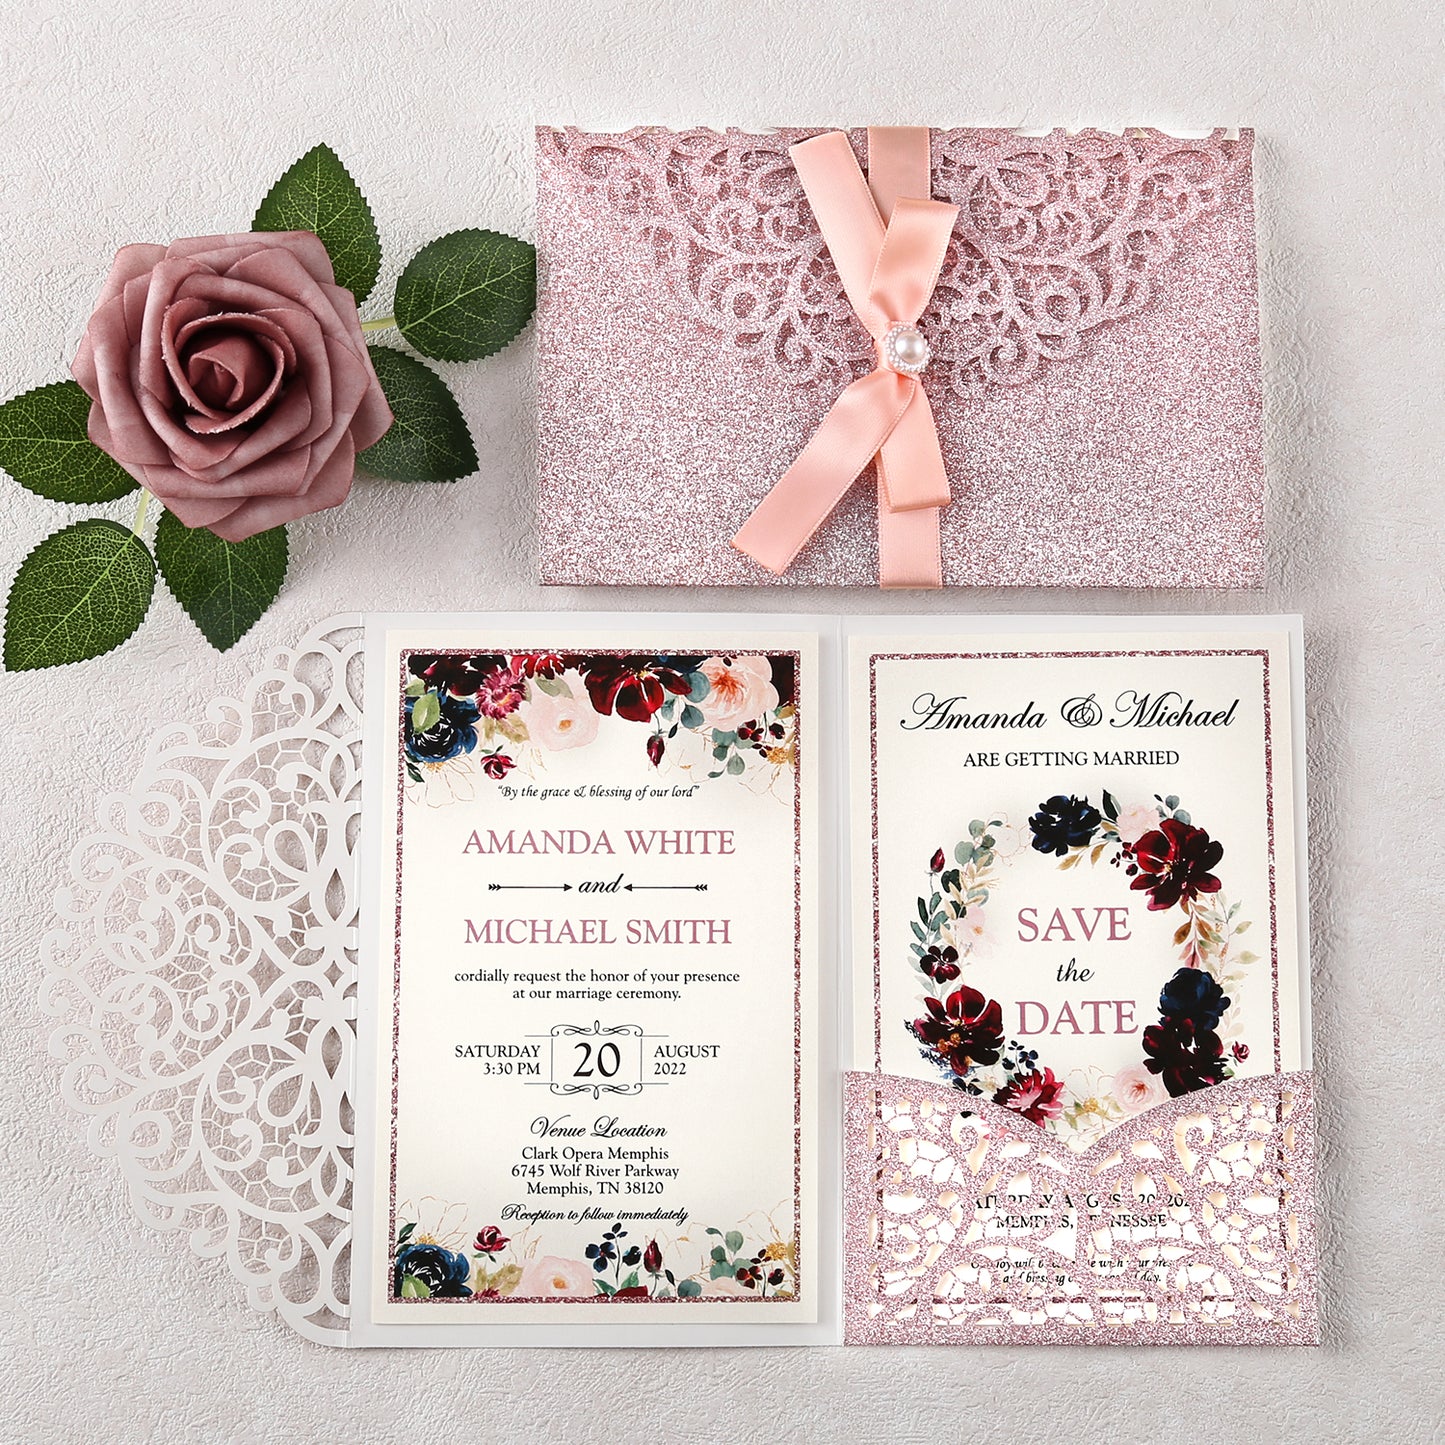 4.7 x7 inch Rose Gold Glitter Laser Cut Hollow Rose Wedding Invitations Cards with Envelopes for Wedding Party